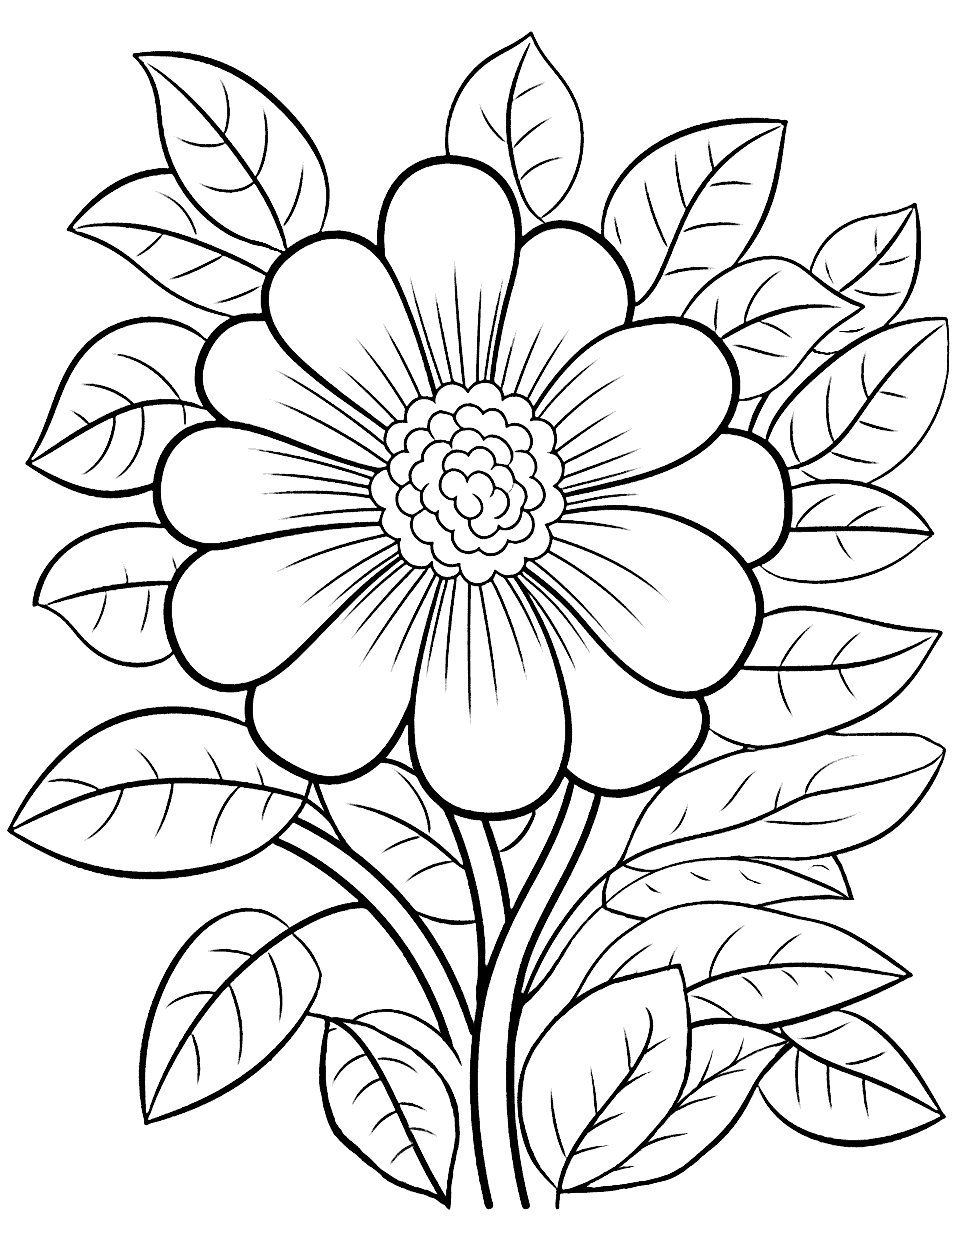 Cool Floral Design Flower Coloring Page - An advanced coloring page featuring a cool floral design.